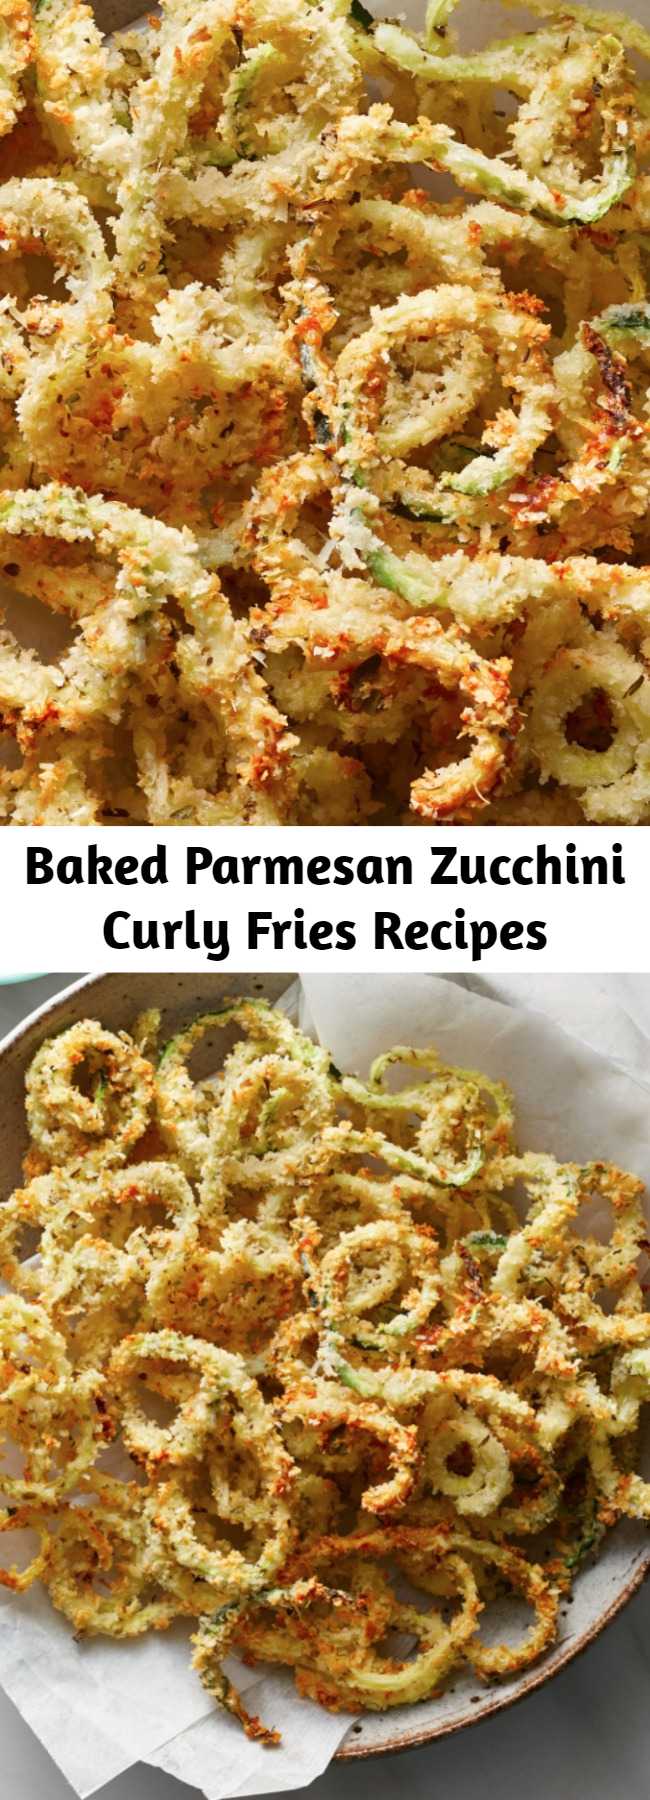 Baked Parmesan Zucchini Curly Fries Recipes - This healthy recipe combines two bar food favorites--fried zucchini and curly fries--into one tempting package. No matter what you serve them with, they're a fun way to eat more vegetables for kids and adults alike. #comfortfood #comfortfoodrecipes #healthycomfortfood #healthycomfortfoodrecipes #recipe #healthy